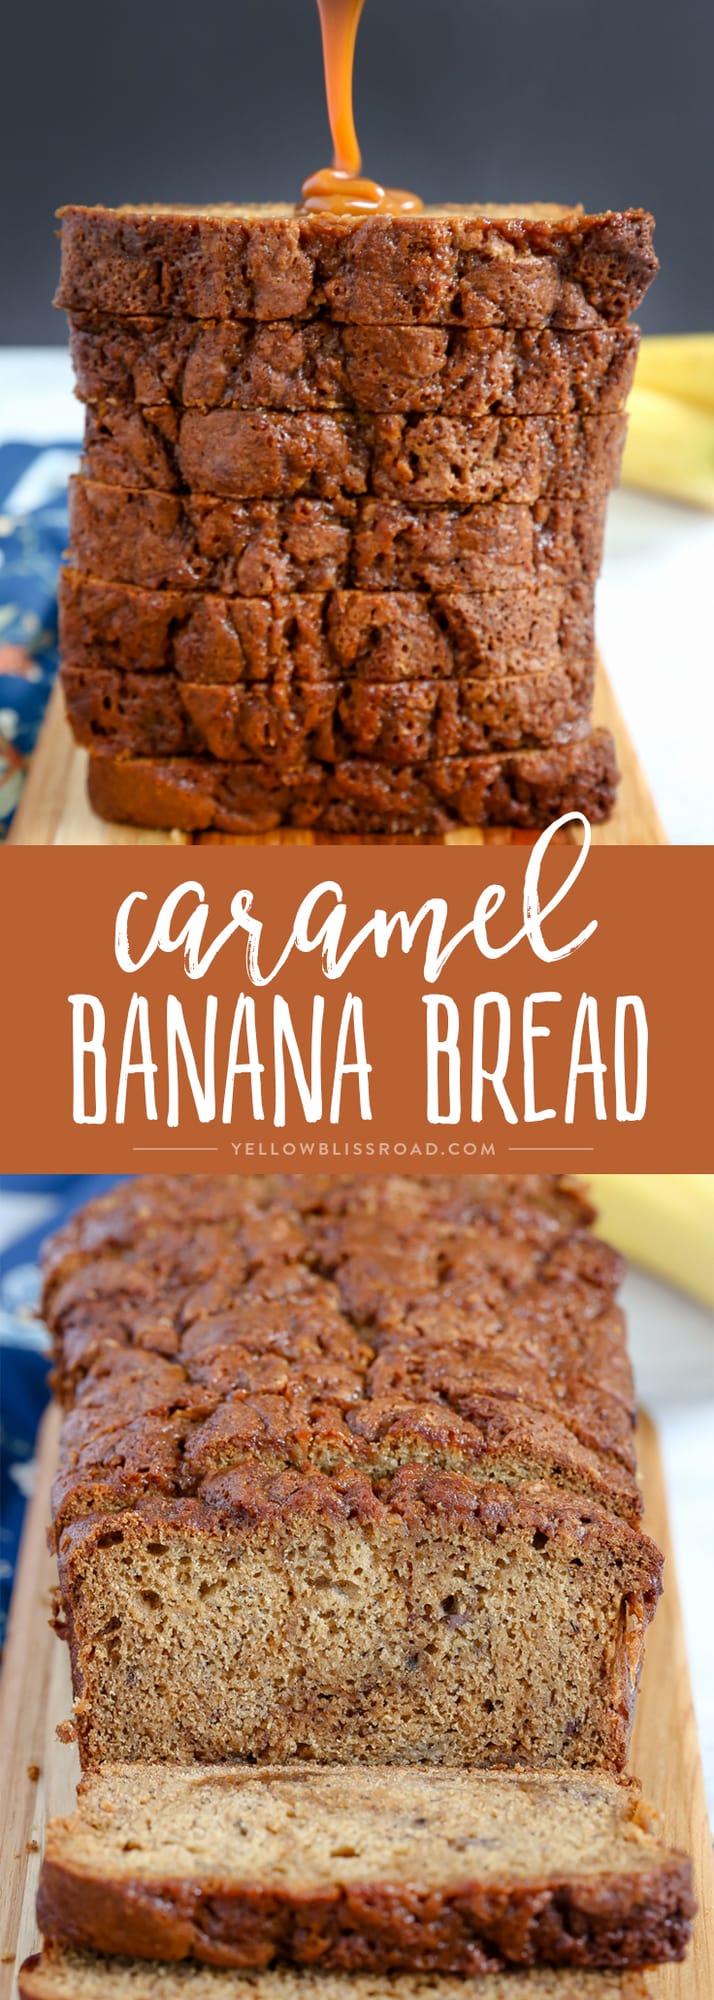 This Caramel Banana Bread is full of tasty bananas and delicious sweet caramel. Finished with a drizzle of caramel, it's a decadent quick bread that makes a delicious dessert or snack.